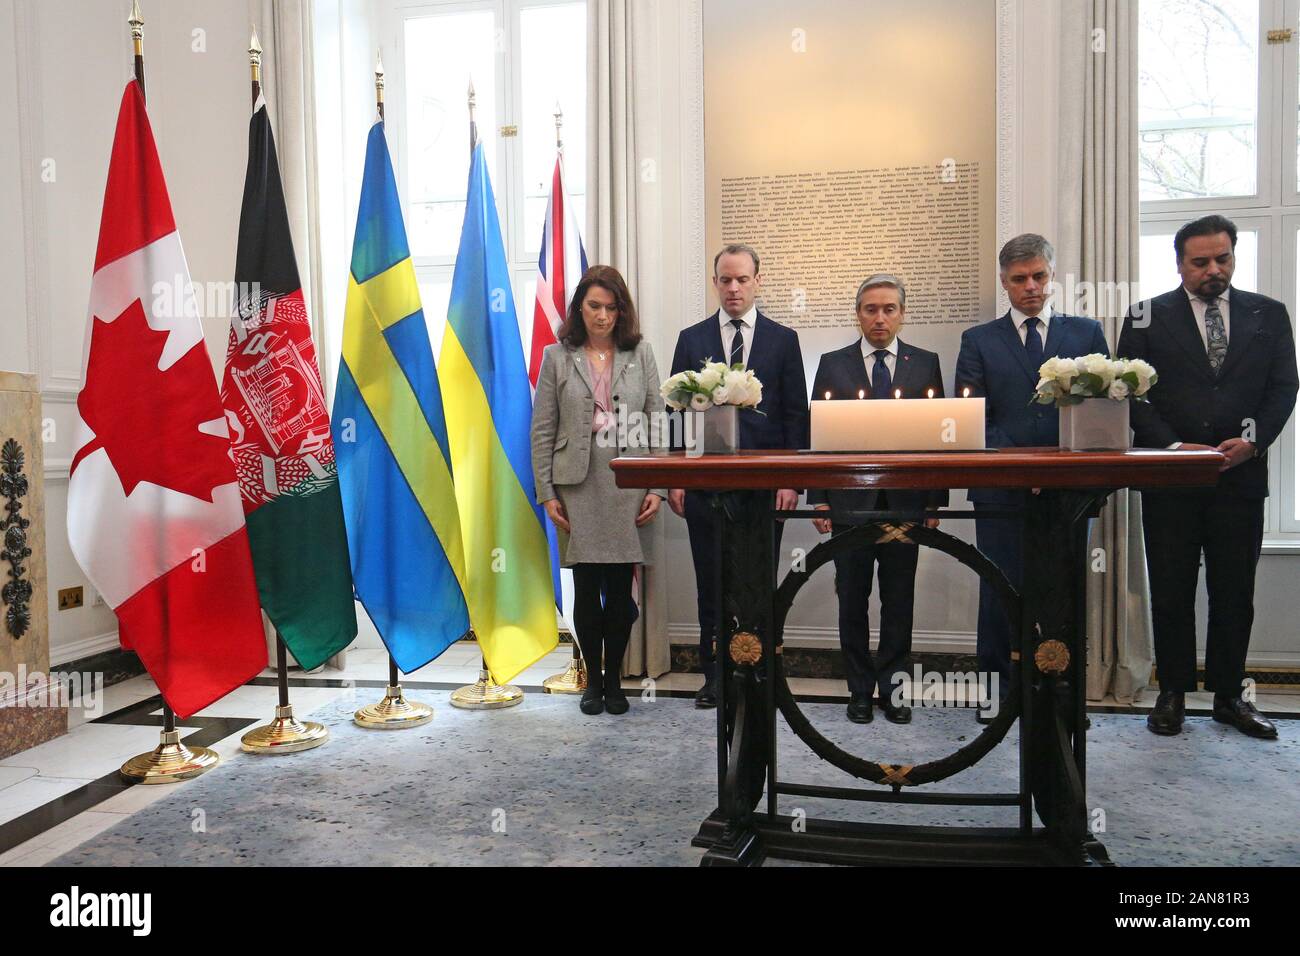 (left to right) Ann Linde, Swedish Minister of Foreign Affairs, Foreign Secretary Dominic Raab, Francois-Philippe Champagne, Canadian Minister of Foreign Affairs, Vadym Prystaiko, Ukrainian Minister of Foreign Affairs, and Idrees Zaman, Acting Foreign Minister for Afghanistan, during a moment of reflection at Canada House, central London for the passengers of the Ukrainian International Airlines flight that crashed just minutes after taking off from Imam Khomeini International Airport in Tehran, killing 176 people. Stock Photo